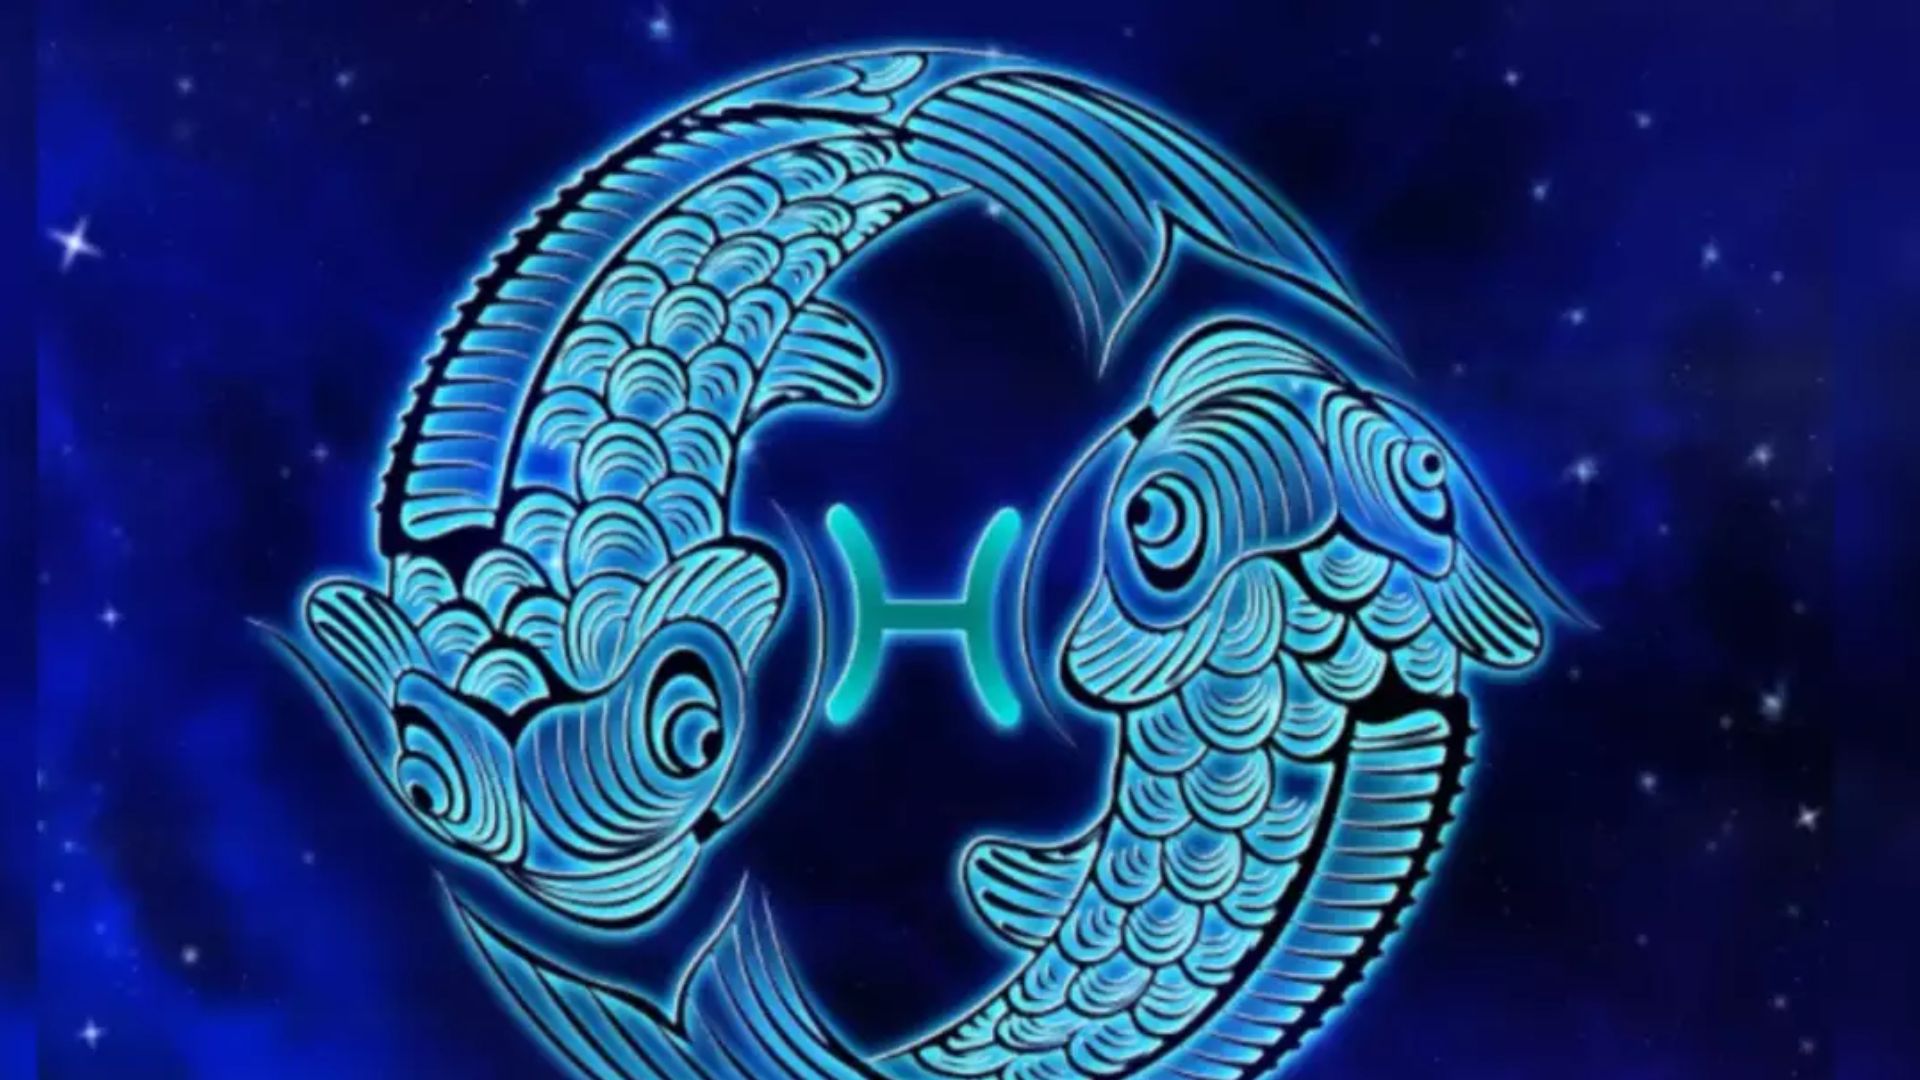 Taurus And Pisces - Compatibility And Relationship Dynamics